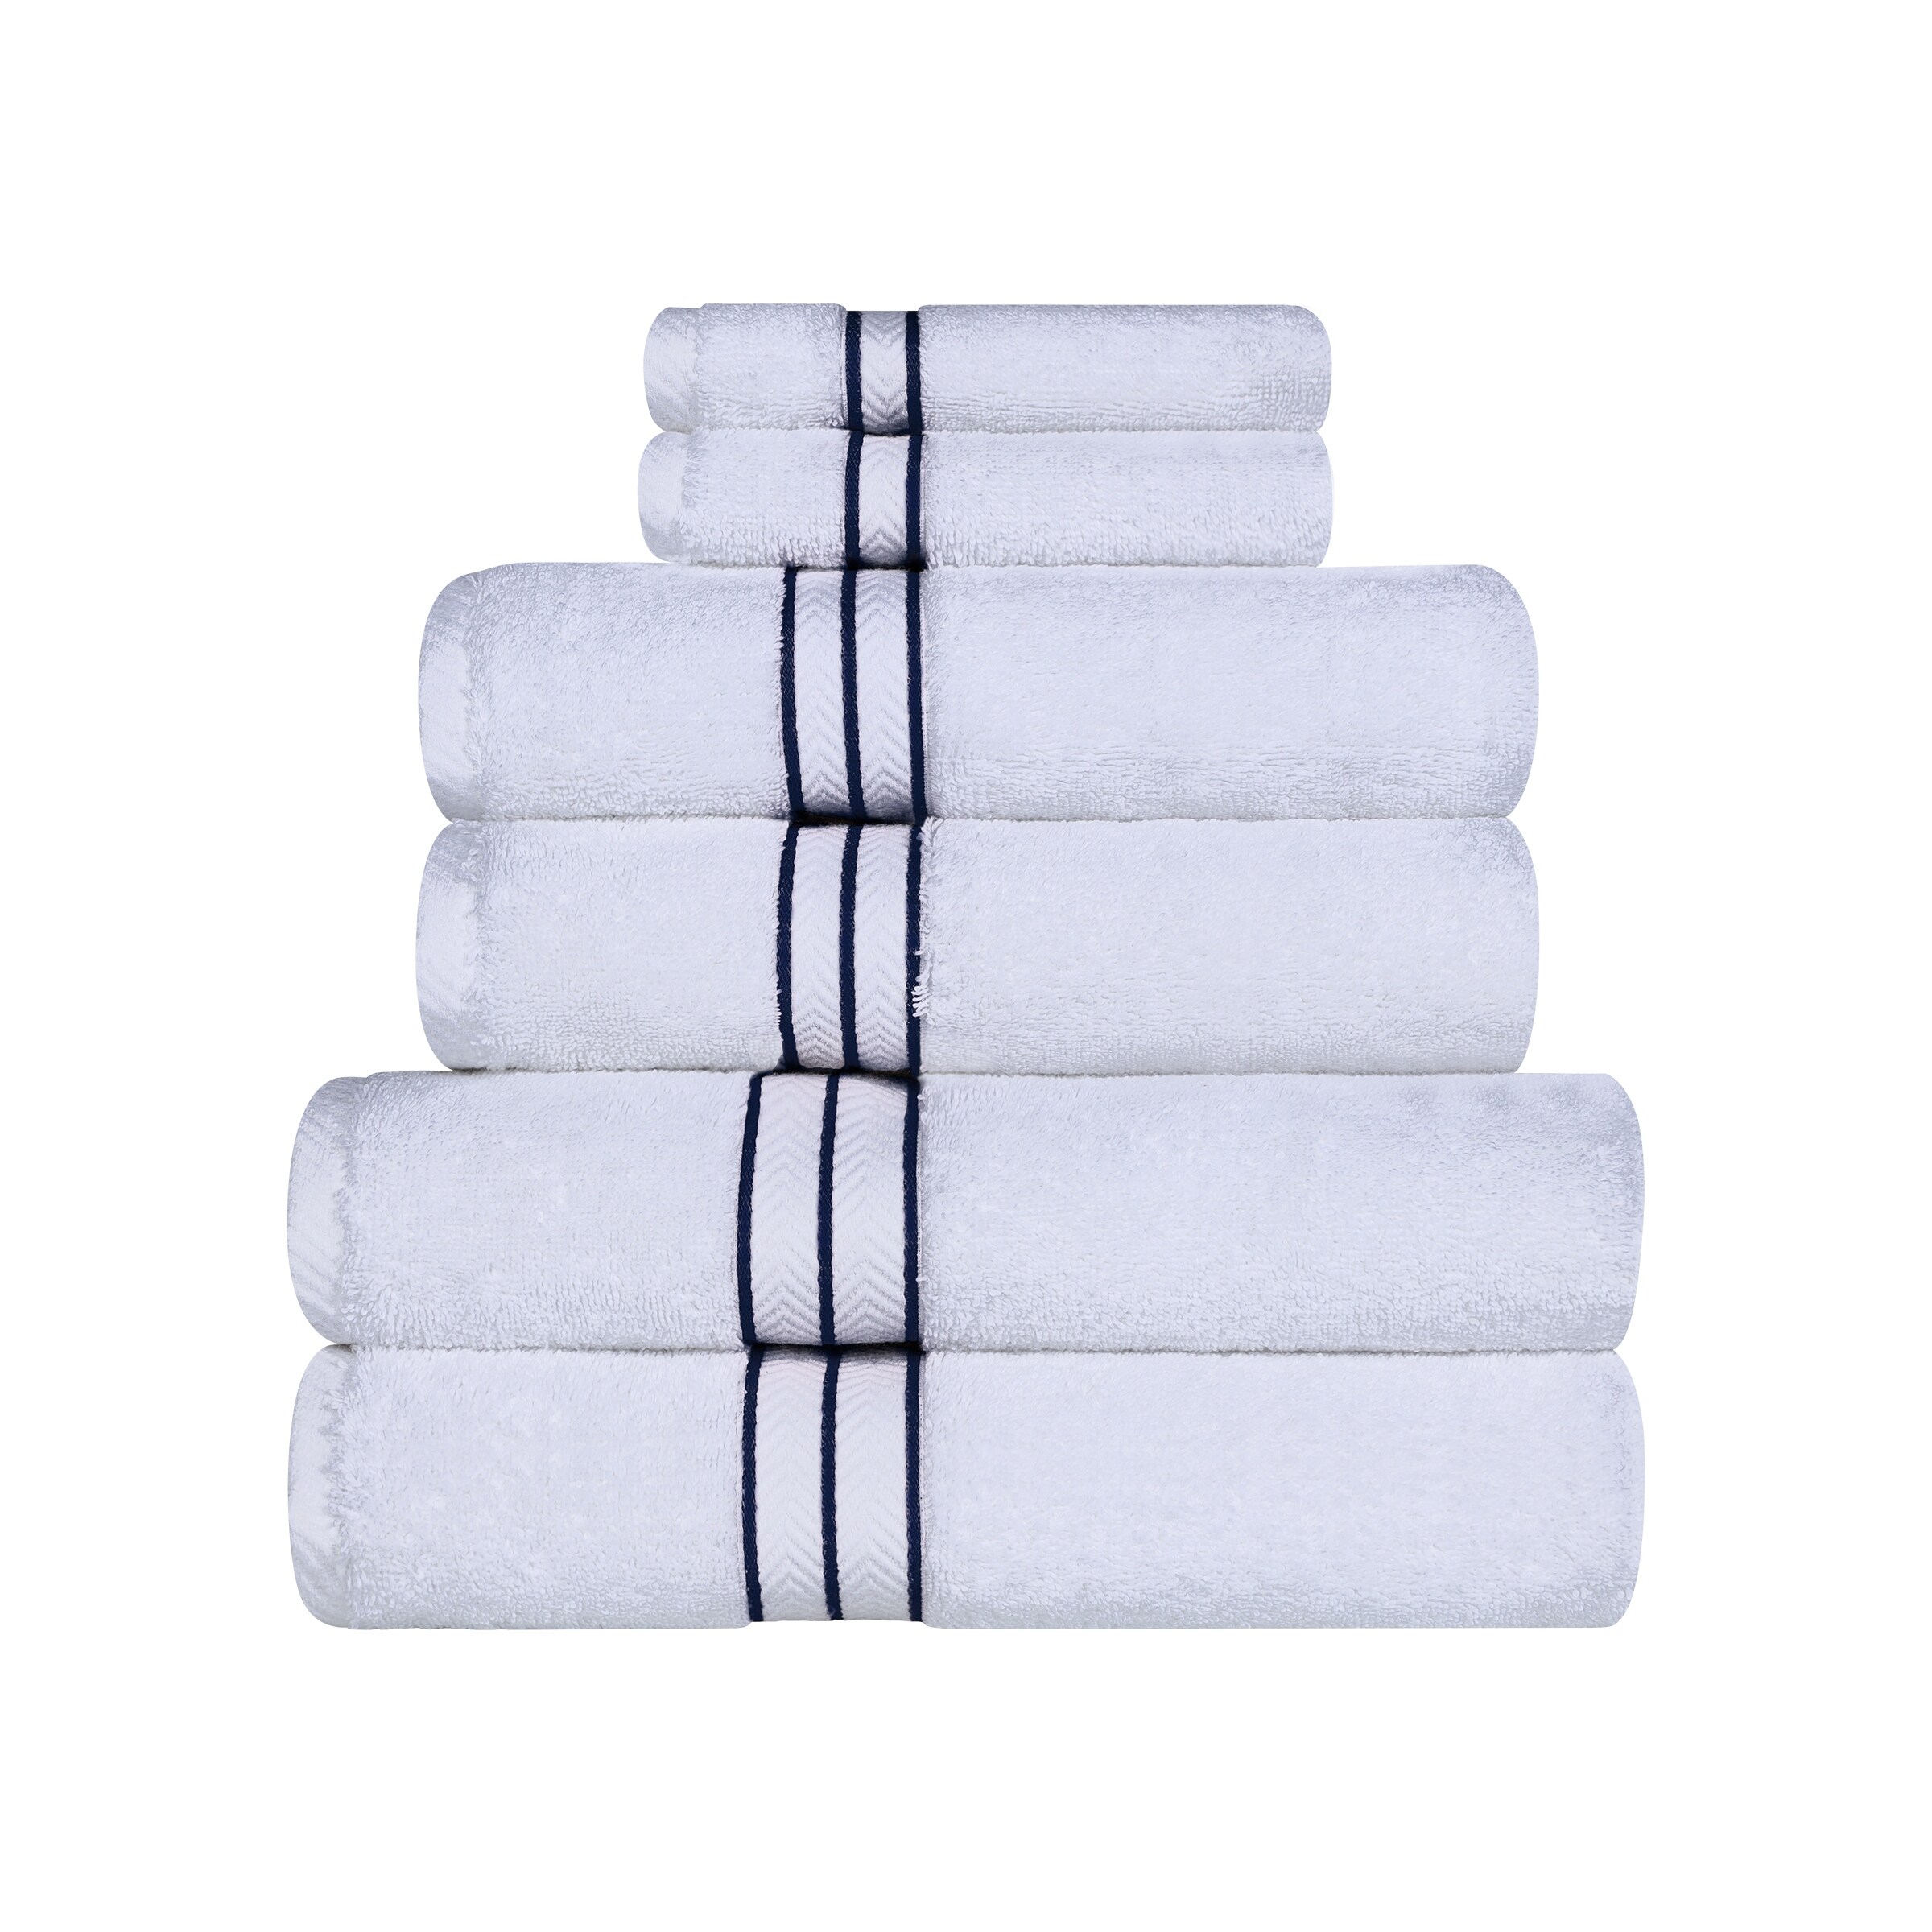 Combed Cotton Towel Sets 6 Pieces Pure Color 2 Large Bath Towels, 2 Hand  Towels, 2 Washcloths Absorbent Home Hotel Bathroom Set - AliExpress